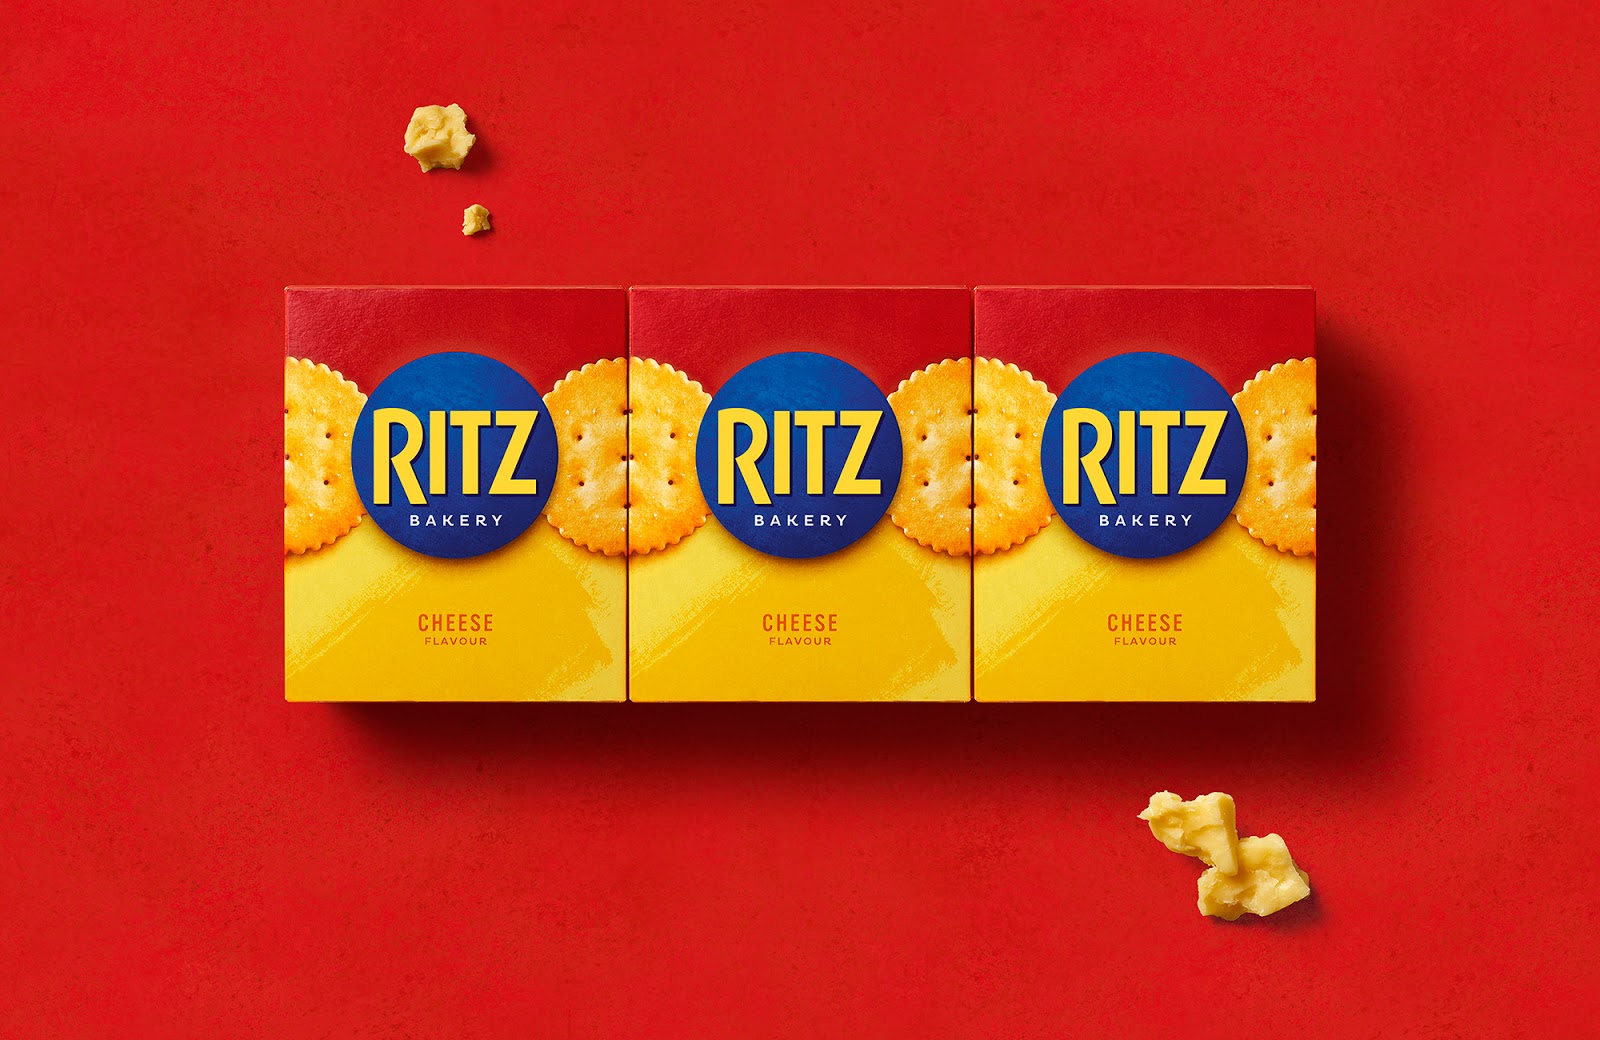 Ritz biscuit redesign provides a homey touch